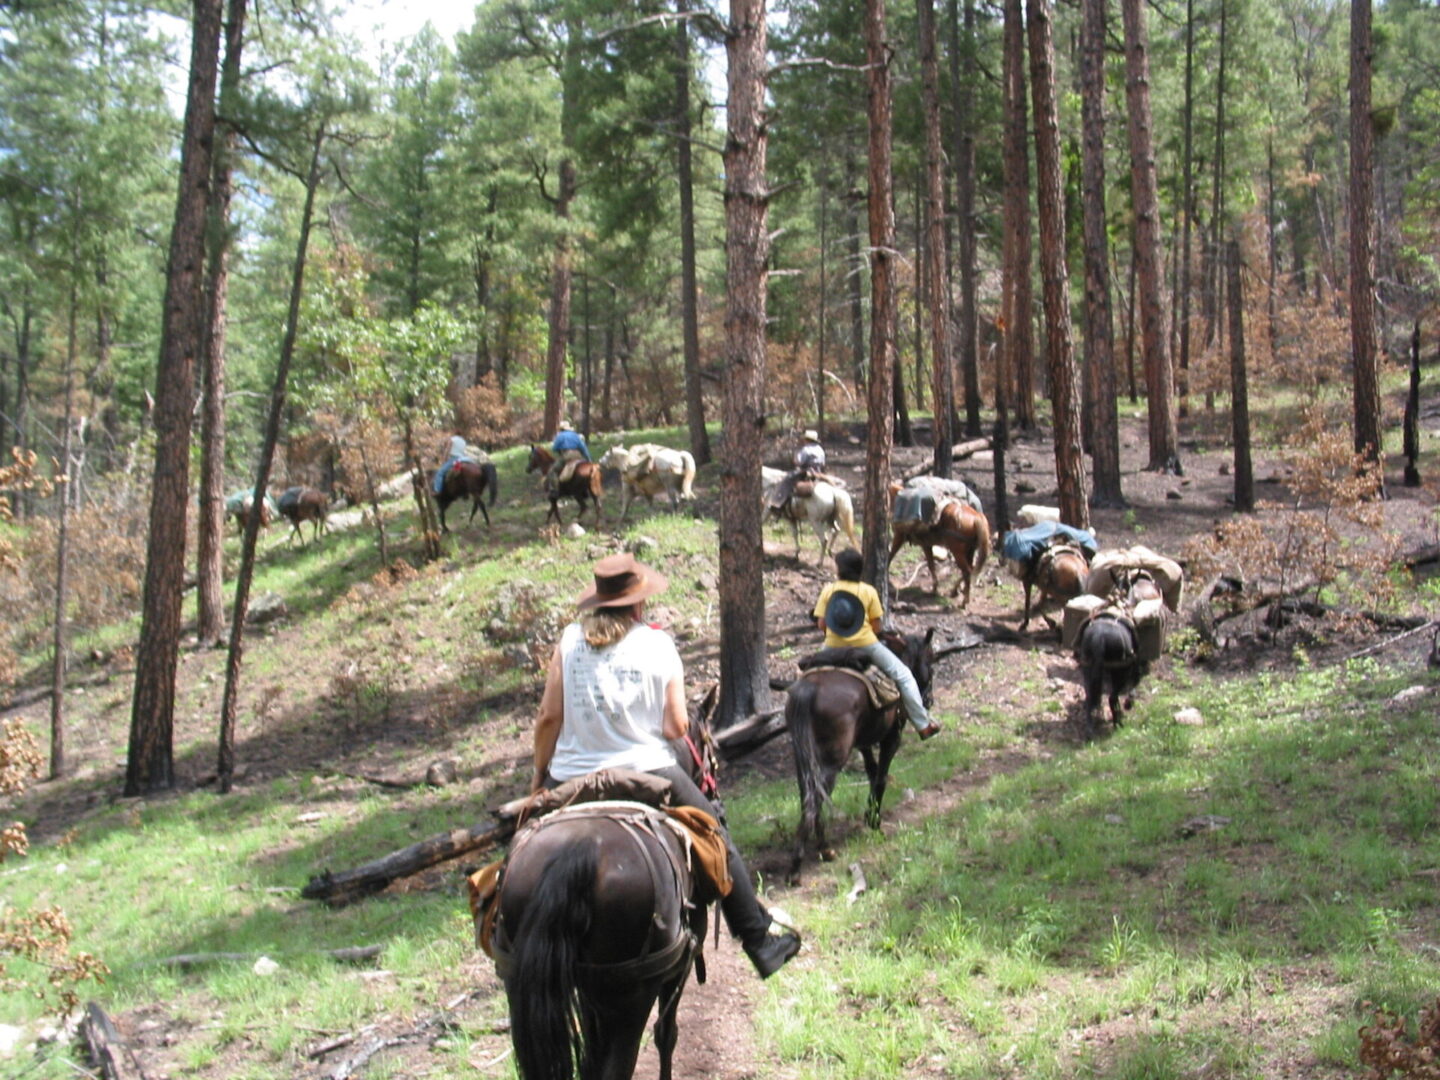 A group of people on horseback in the woods.